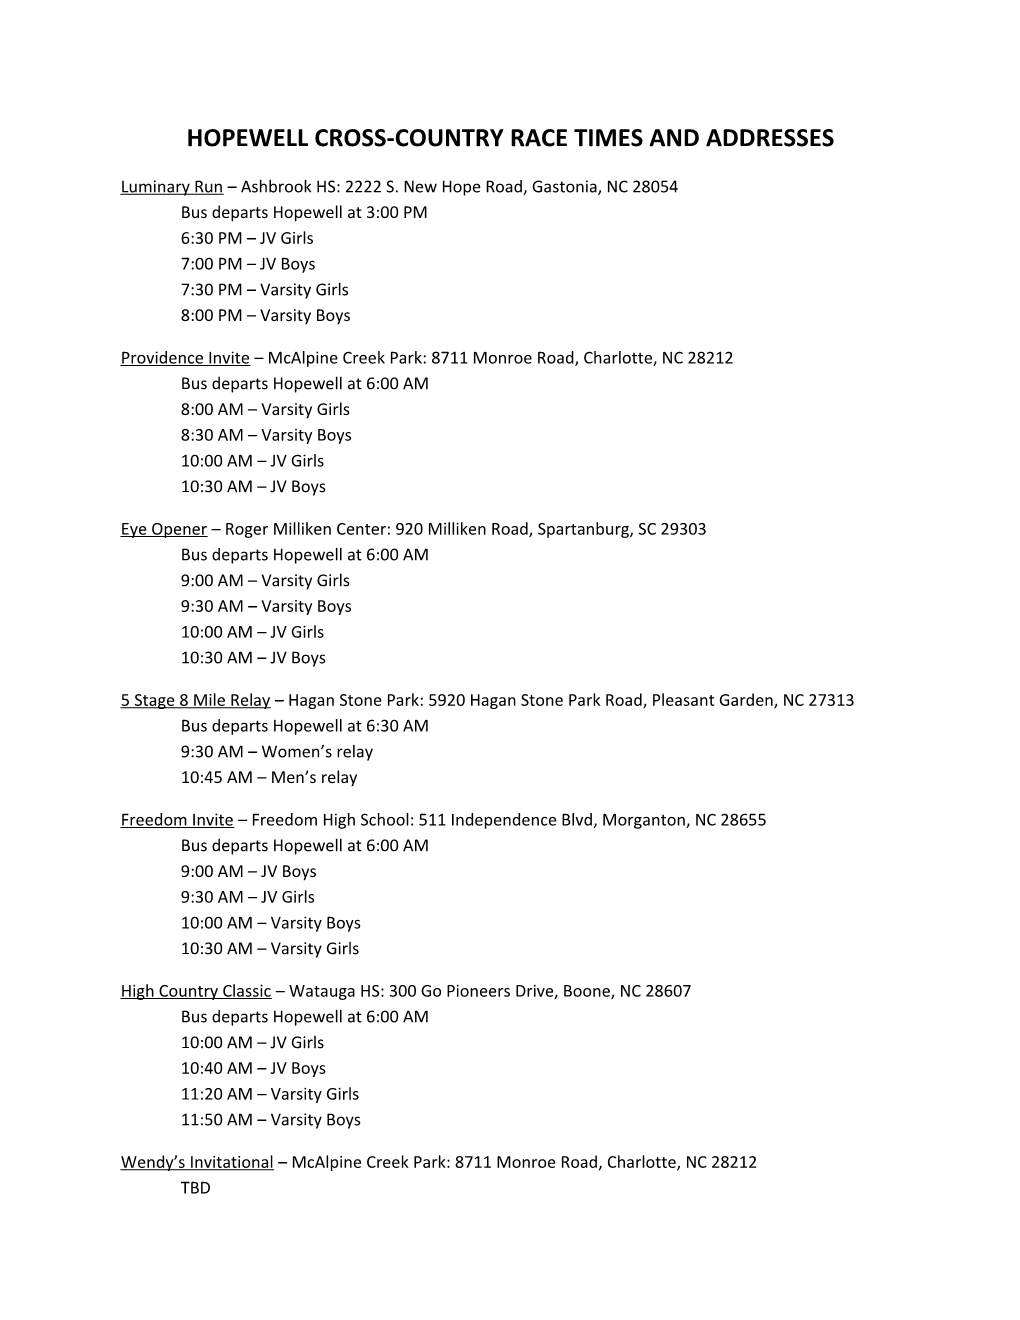 Hopewell Cross-Country Race Times and Addresses